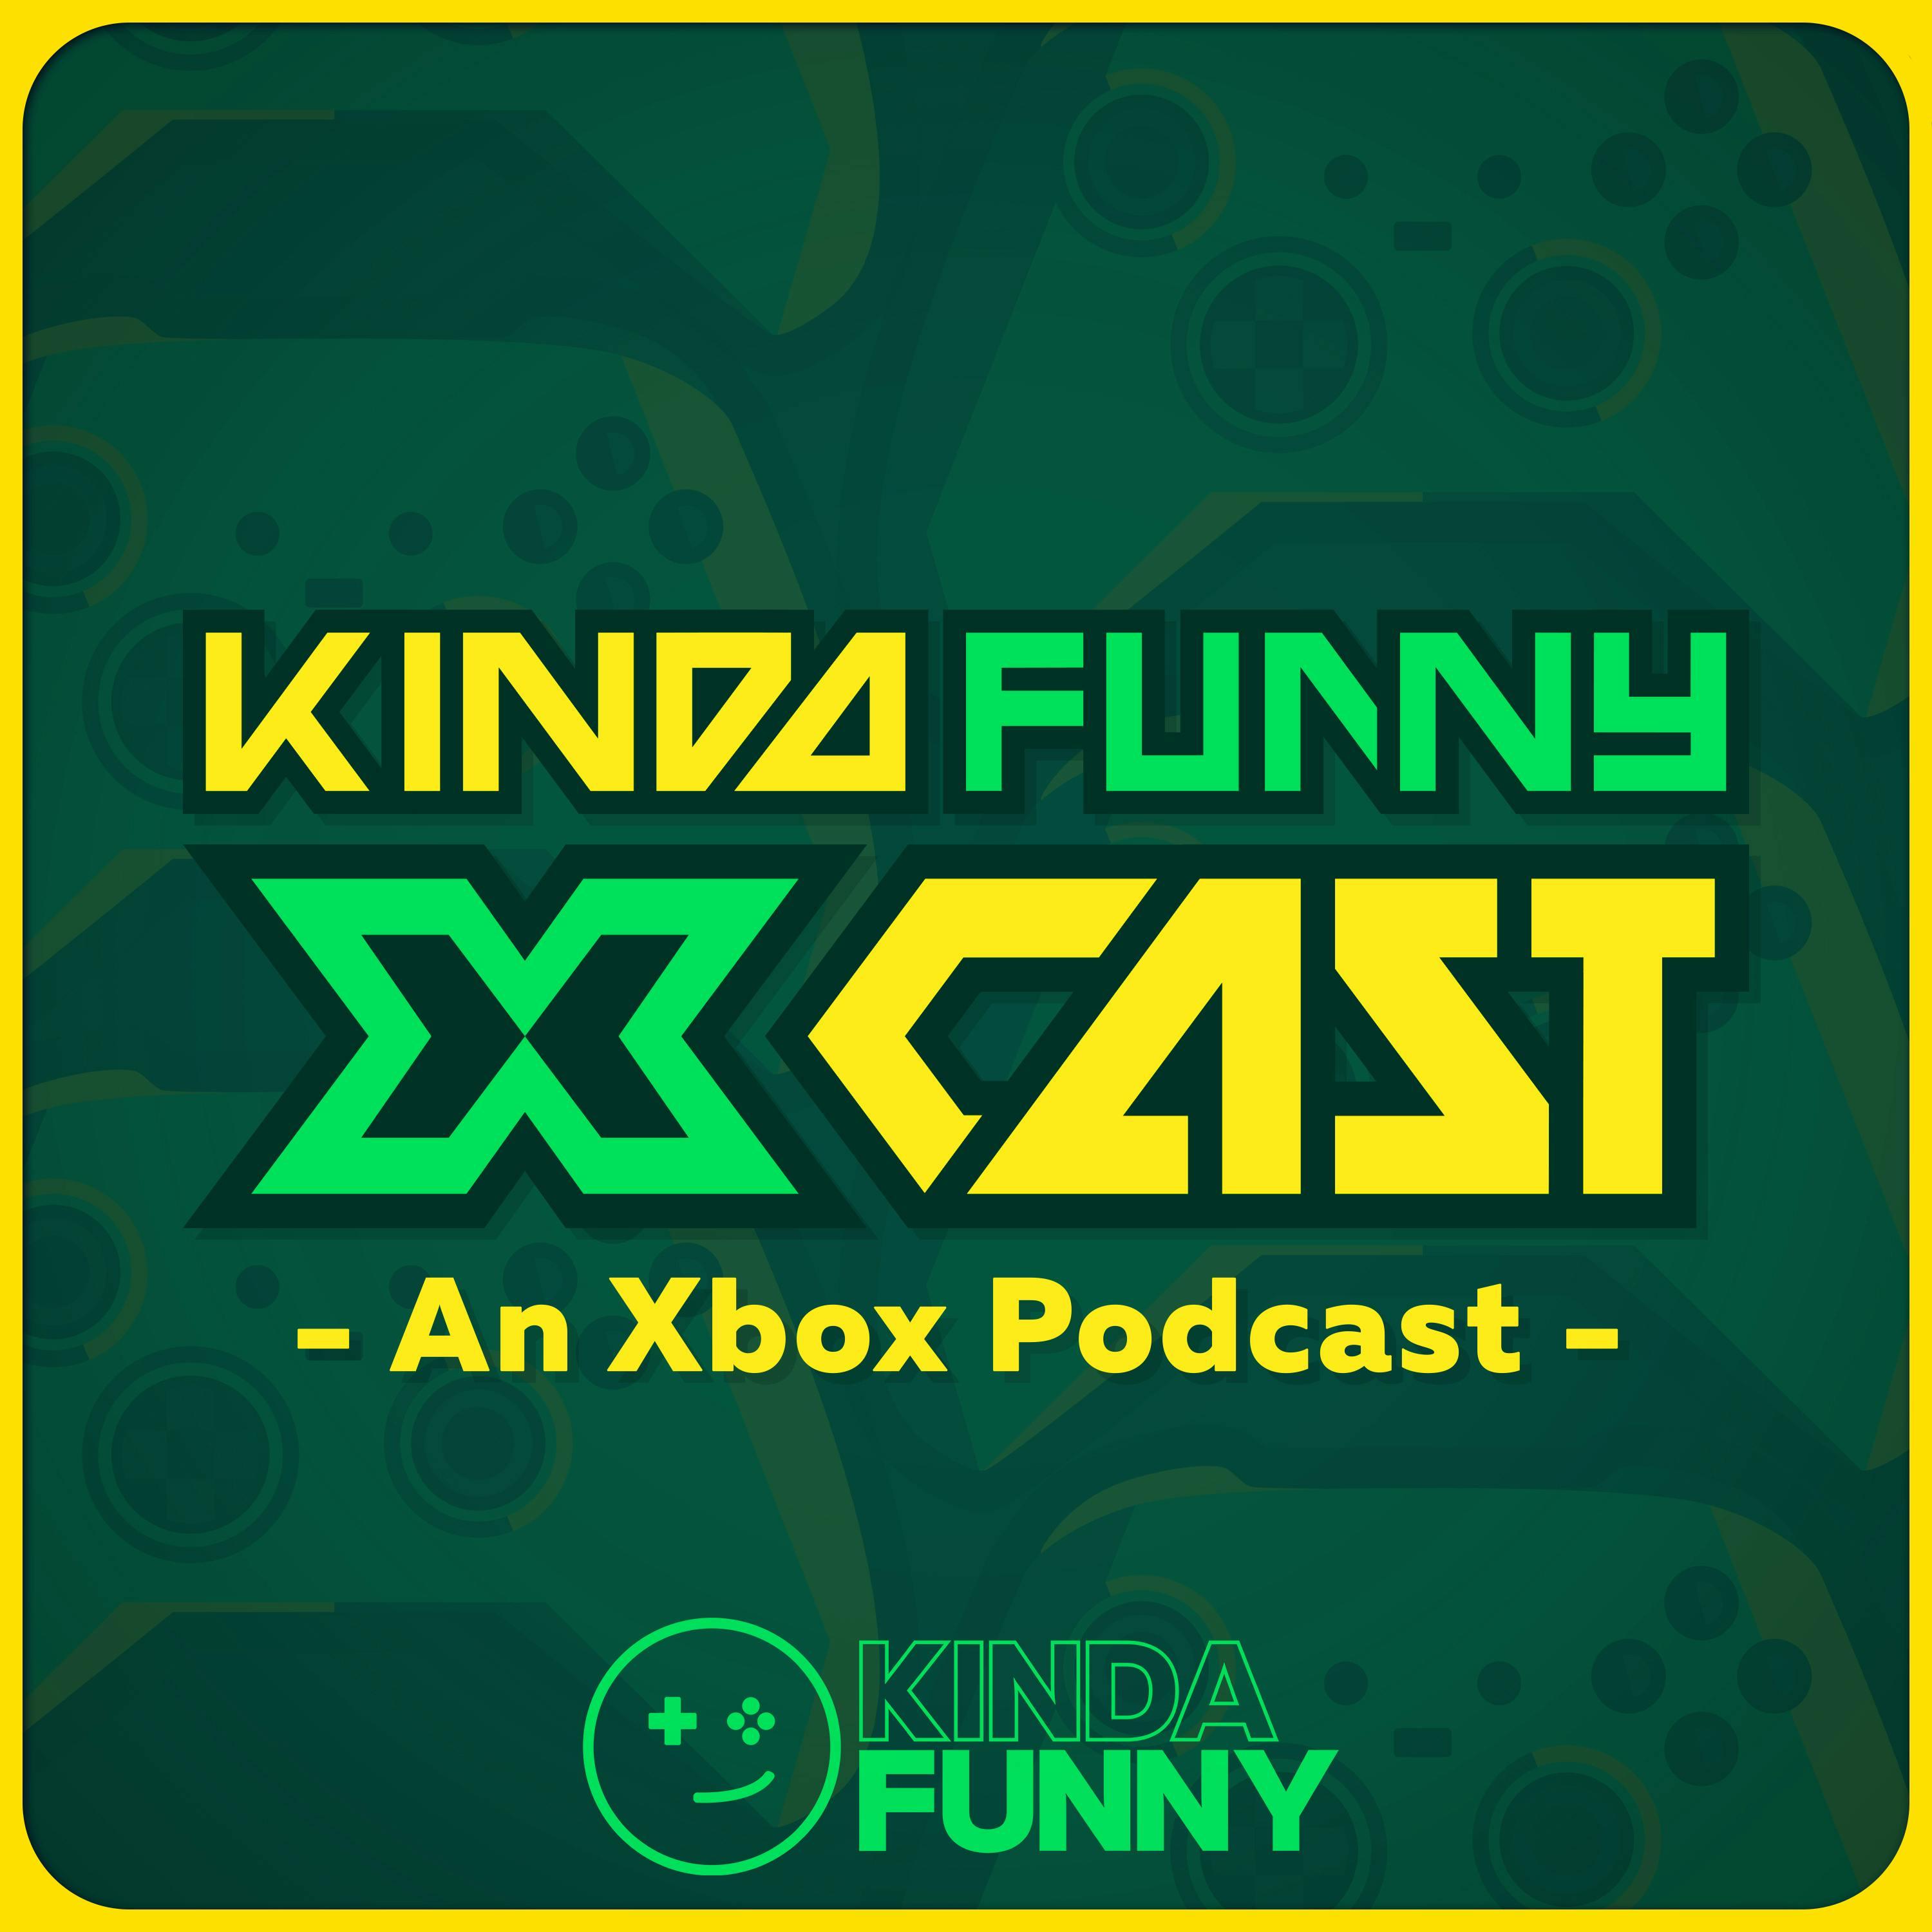 Gamertag Radio / Phil Spencer Xcast Interview - Community Reaction